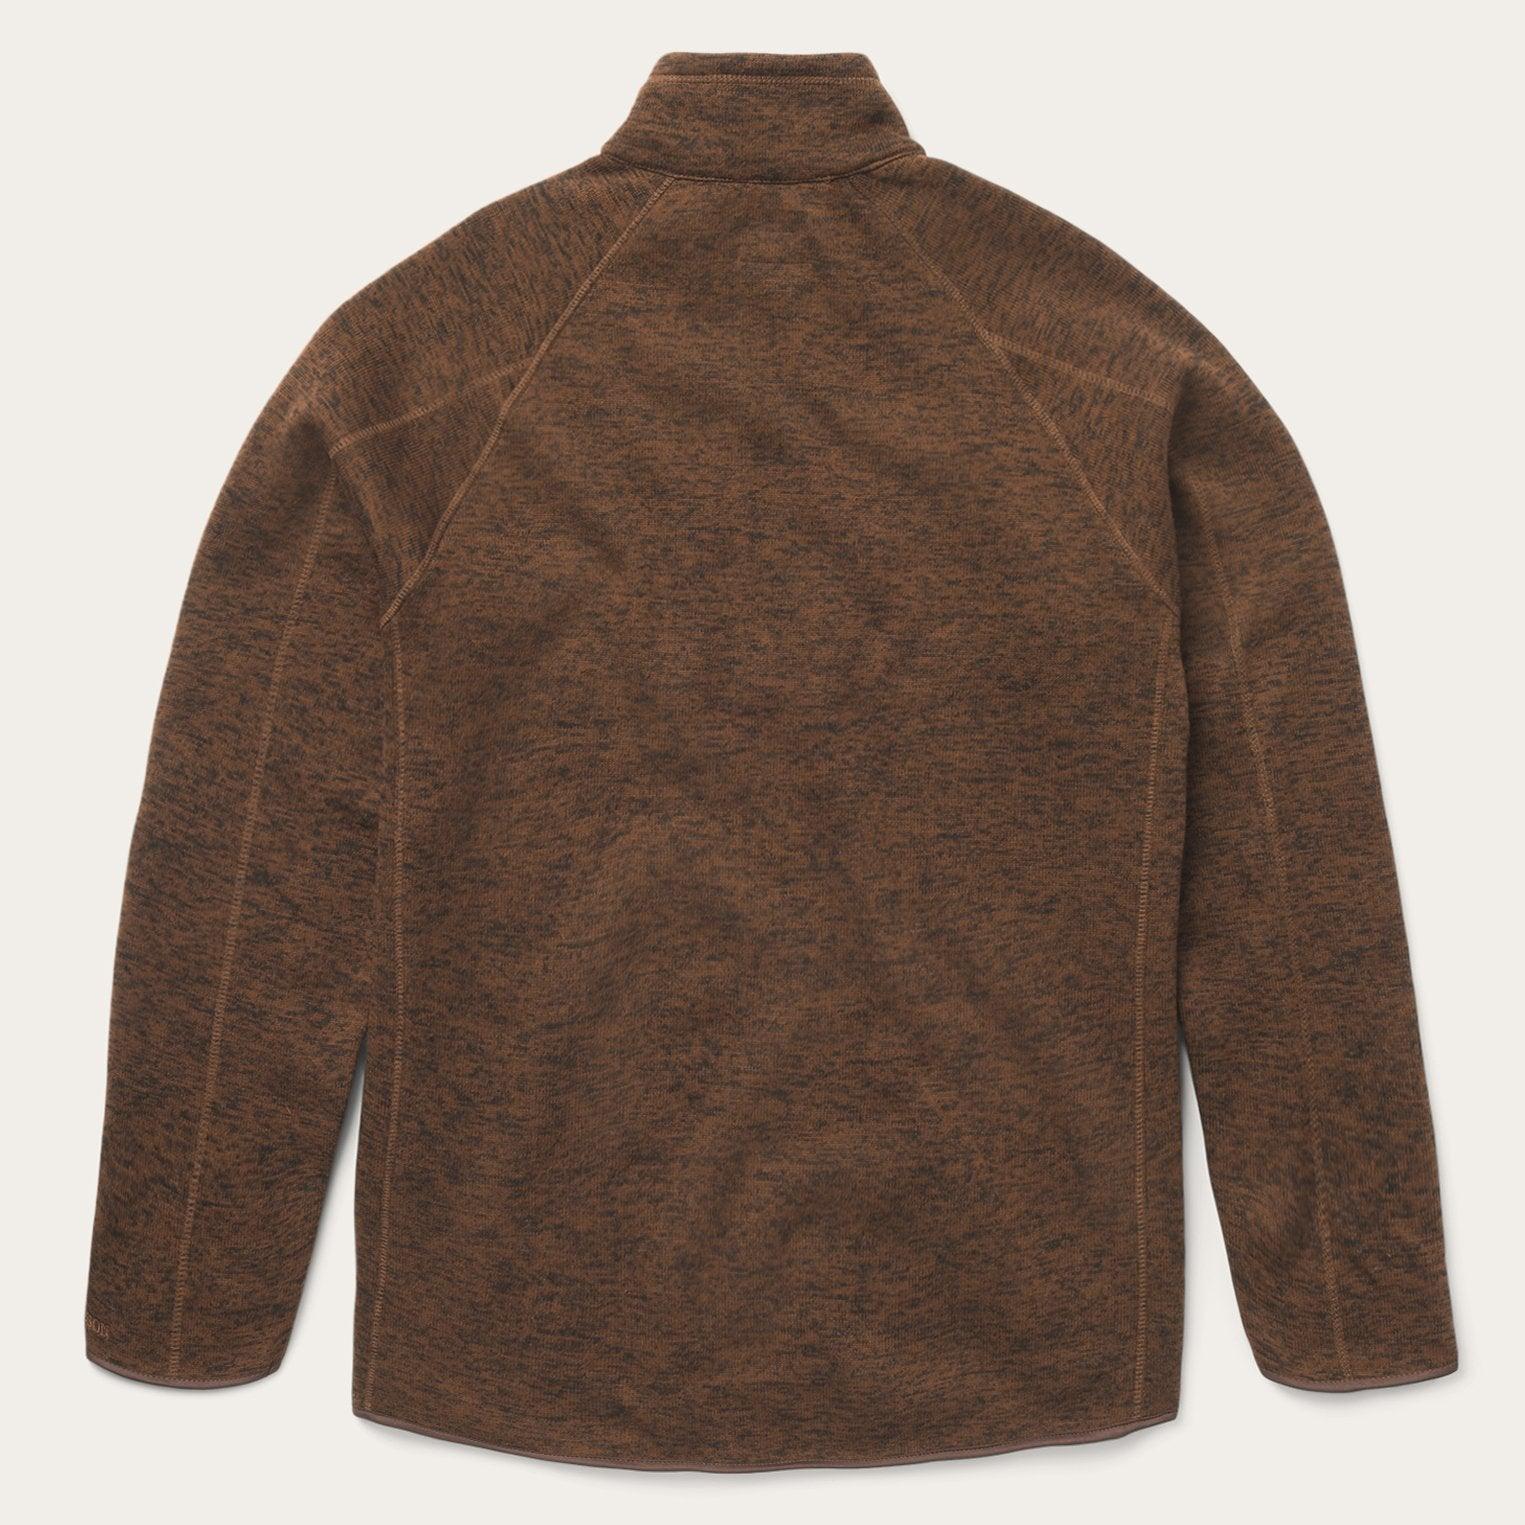 Stetson Brown Pullover Knit Sweater - Flyclothing LLC